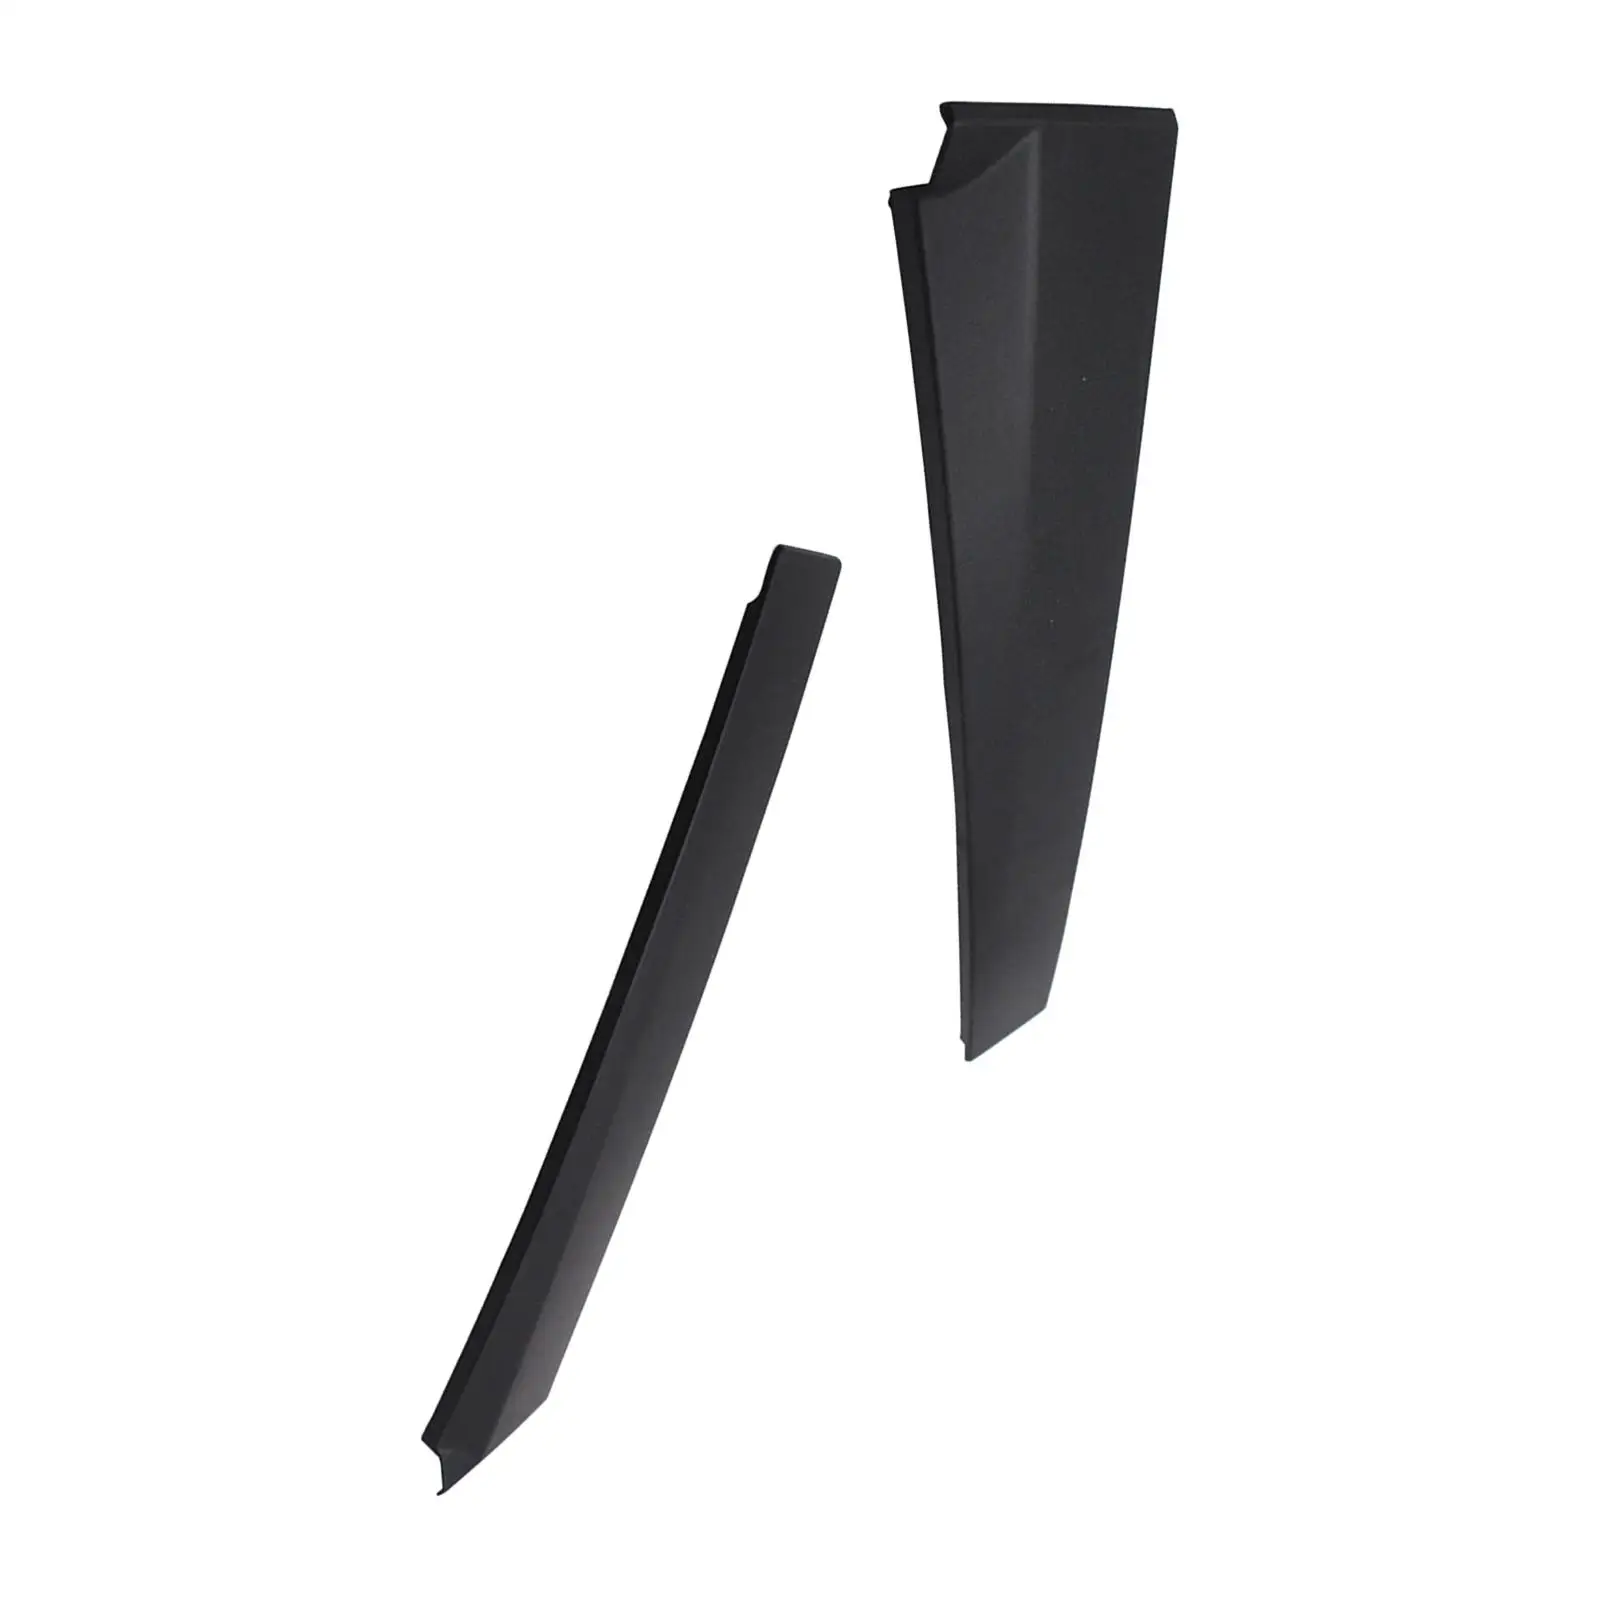 Auto Door Pillar Trim Moulding 1473662 2S51B20898Ag 2S51 B20898Ag for Ford Fiesta MK6 3 Door Replace Parts Durable